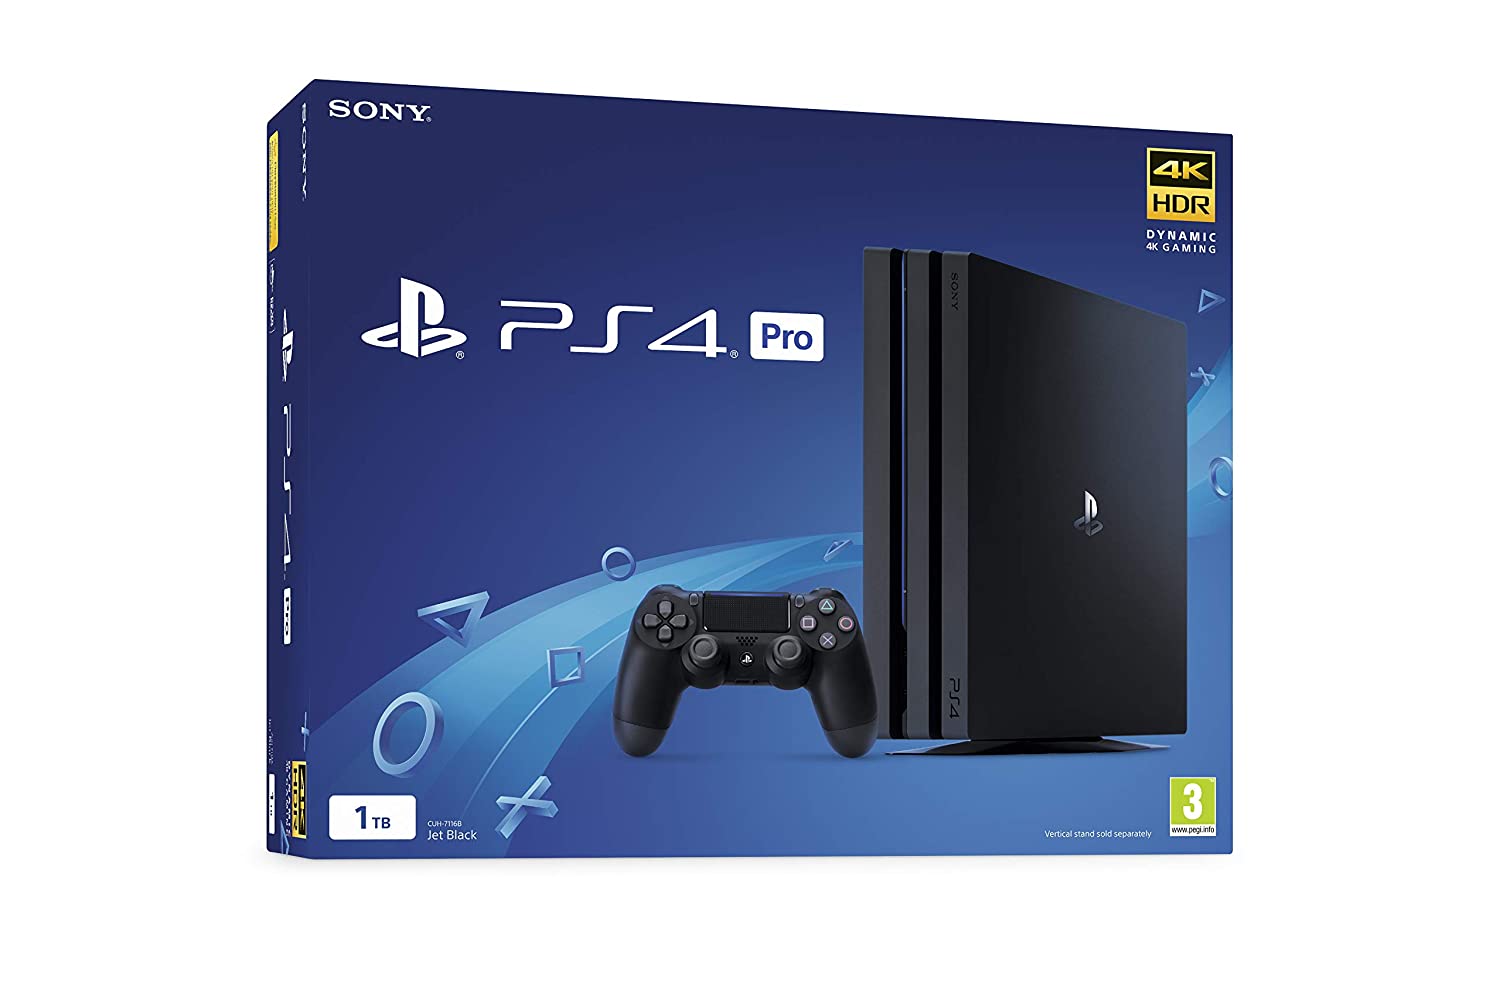 play  station  ps4